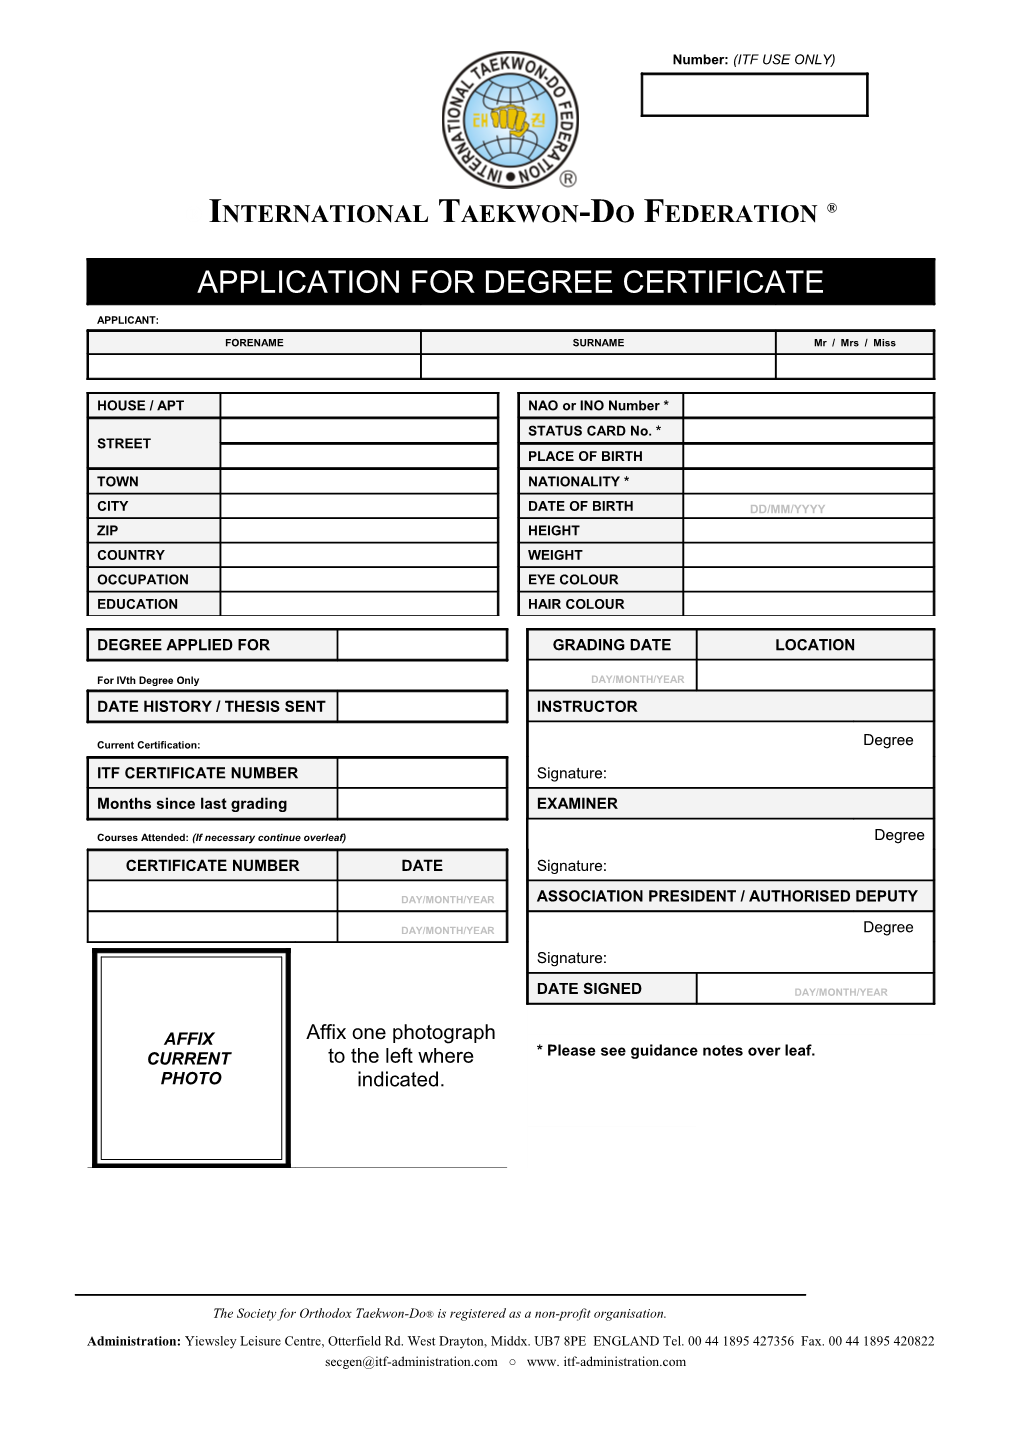 ITF Degree Certificate Application Form